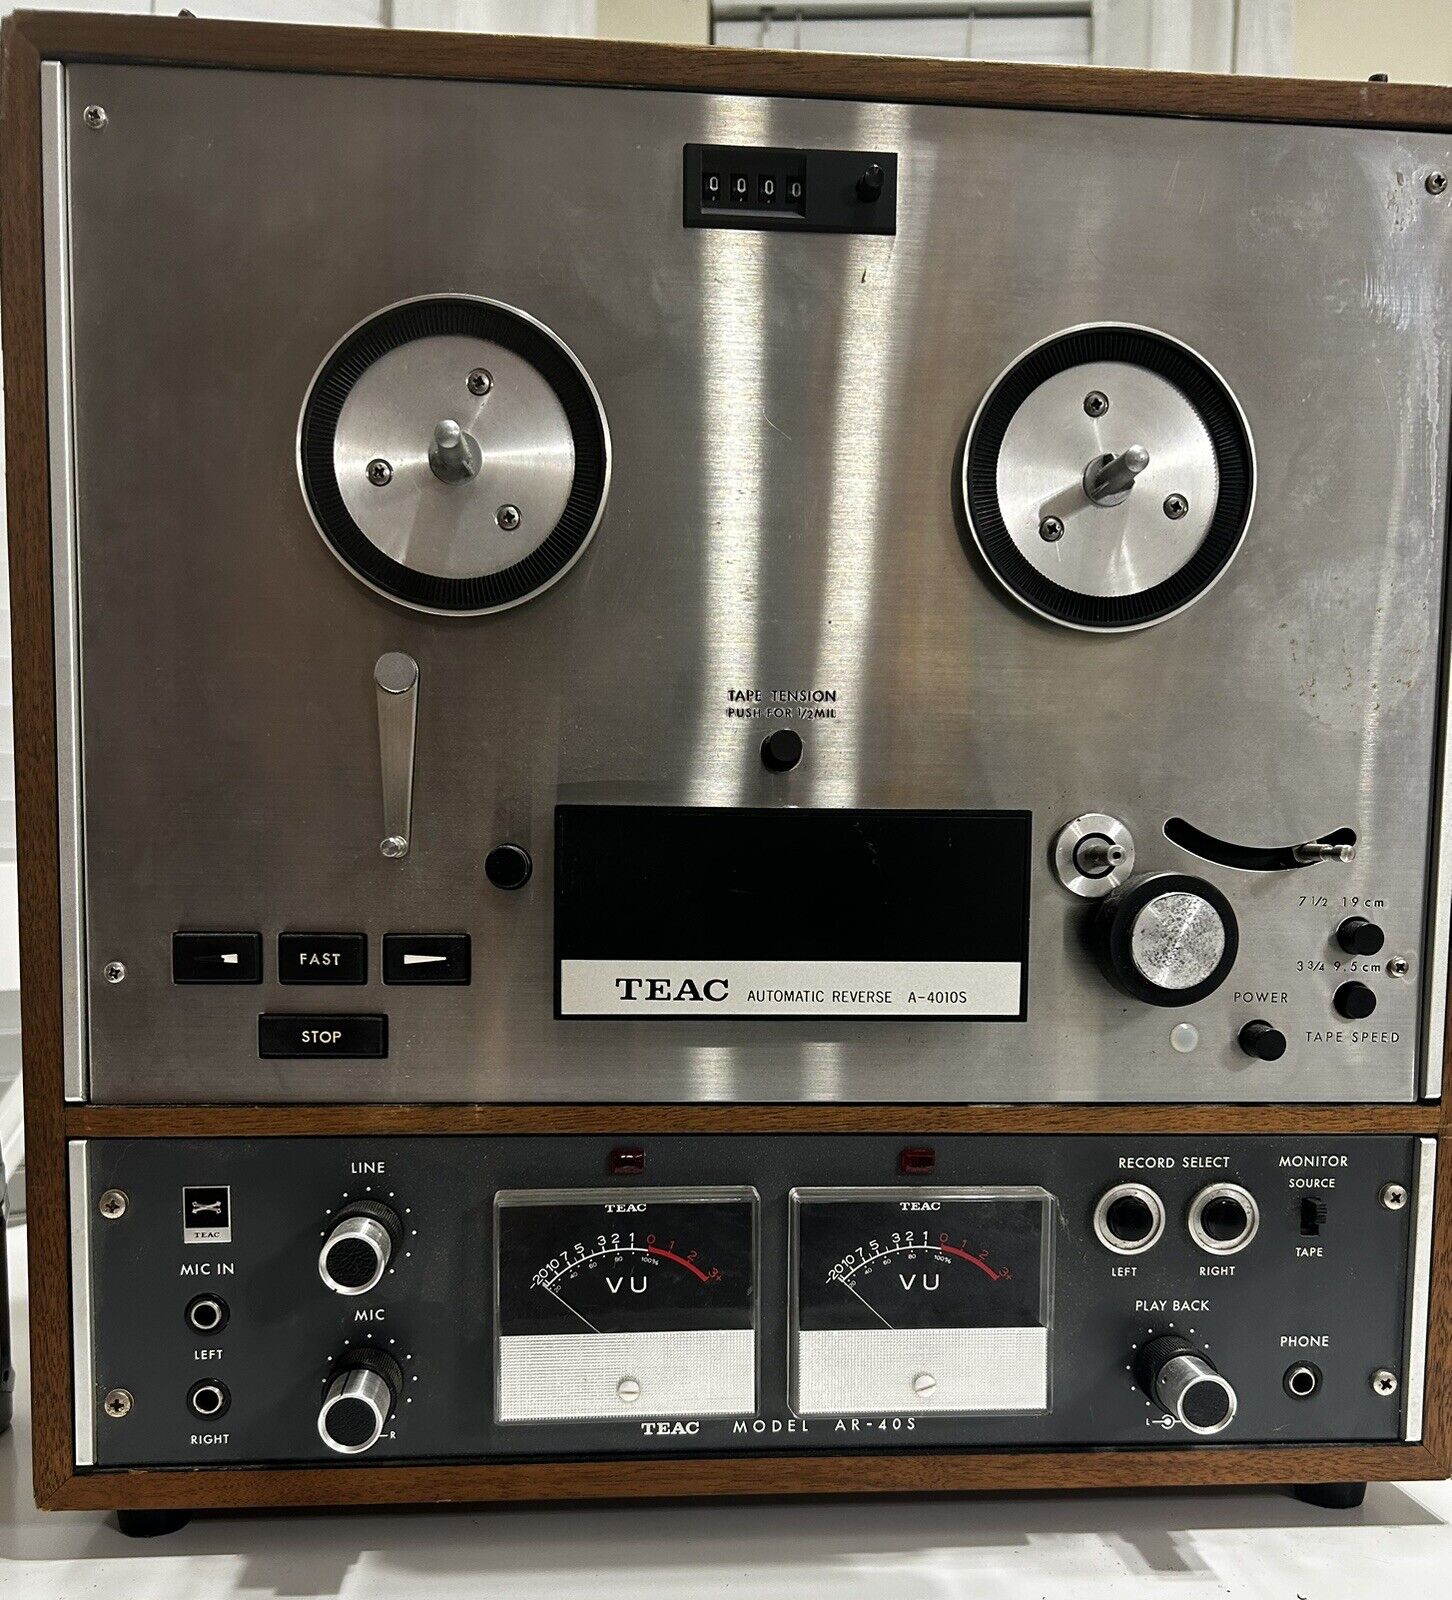 TEAC A-4010S AR-40S Old Reel to Reel Stereo Tape Deck Recorder From Japan